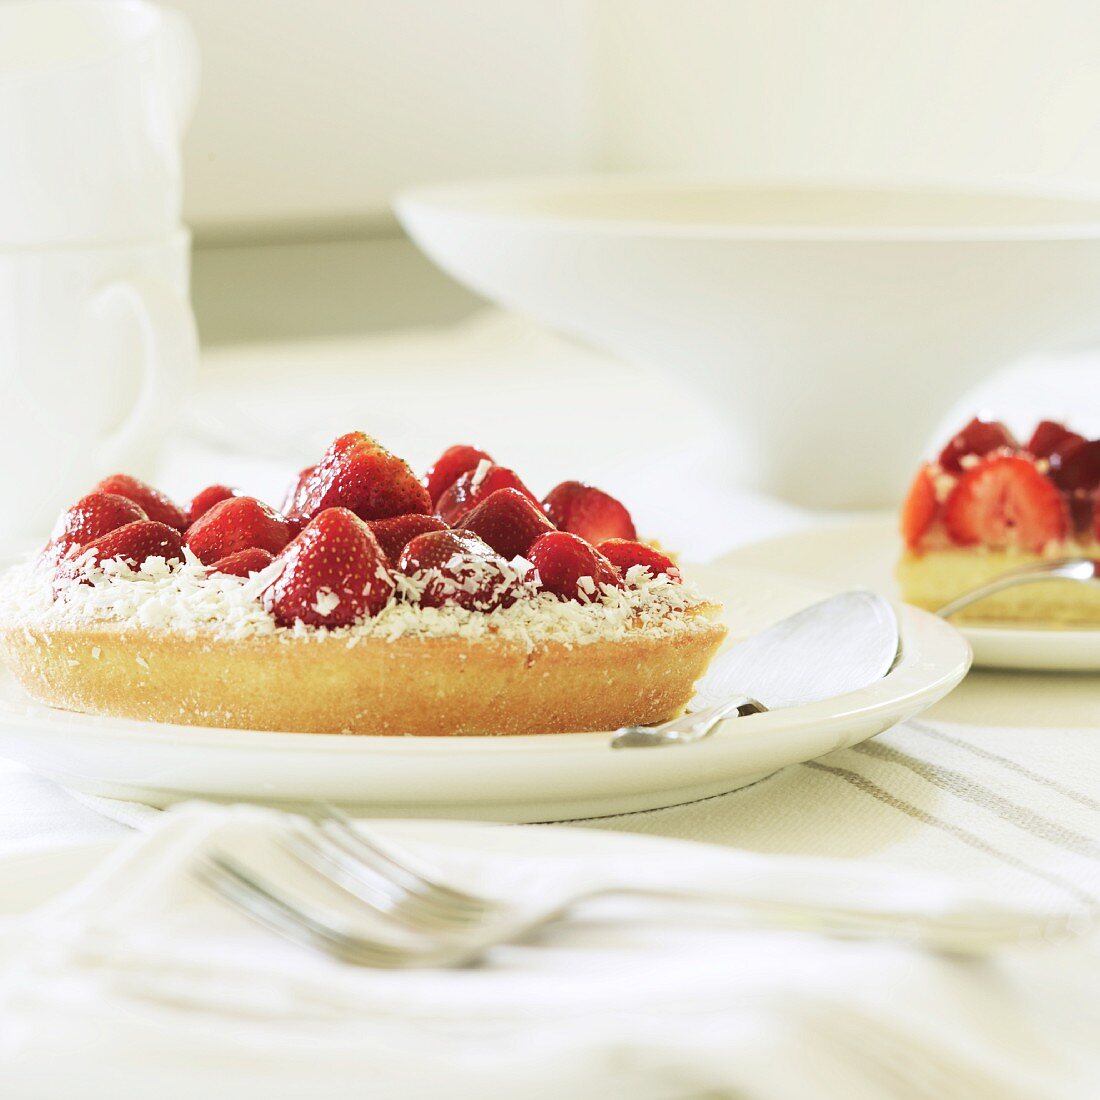 Strawberry cake with grated coconut